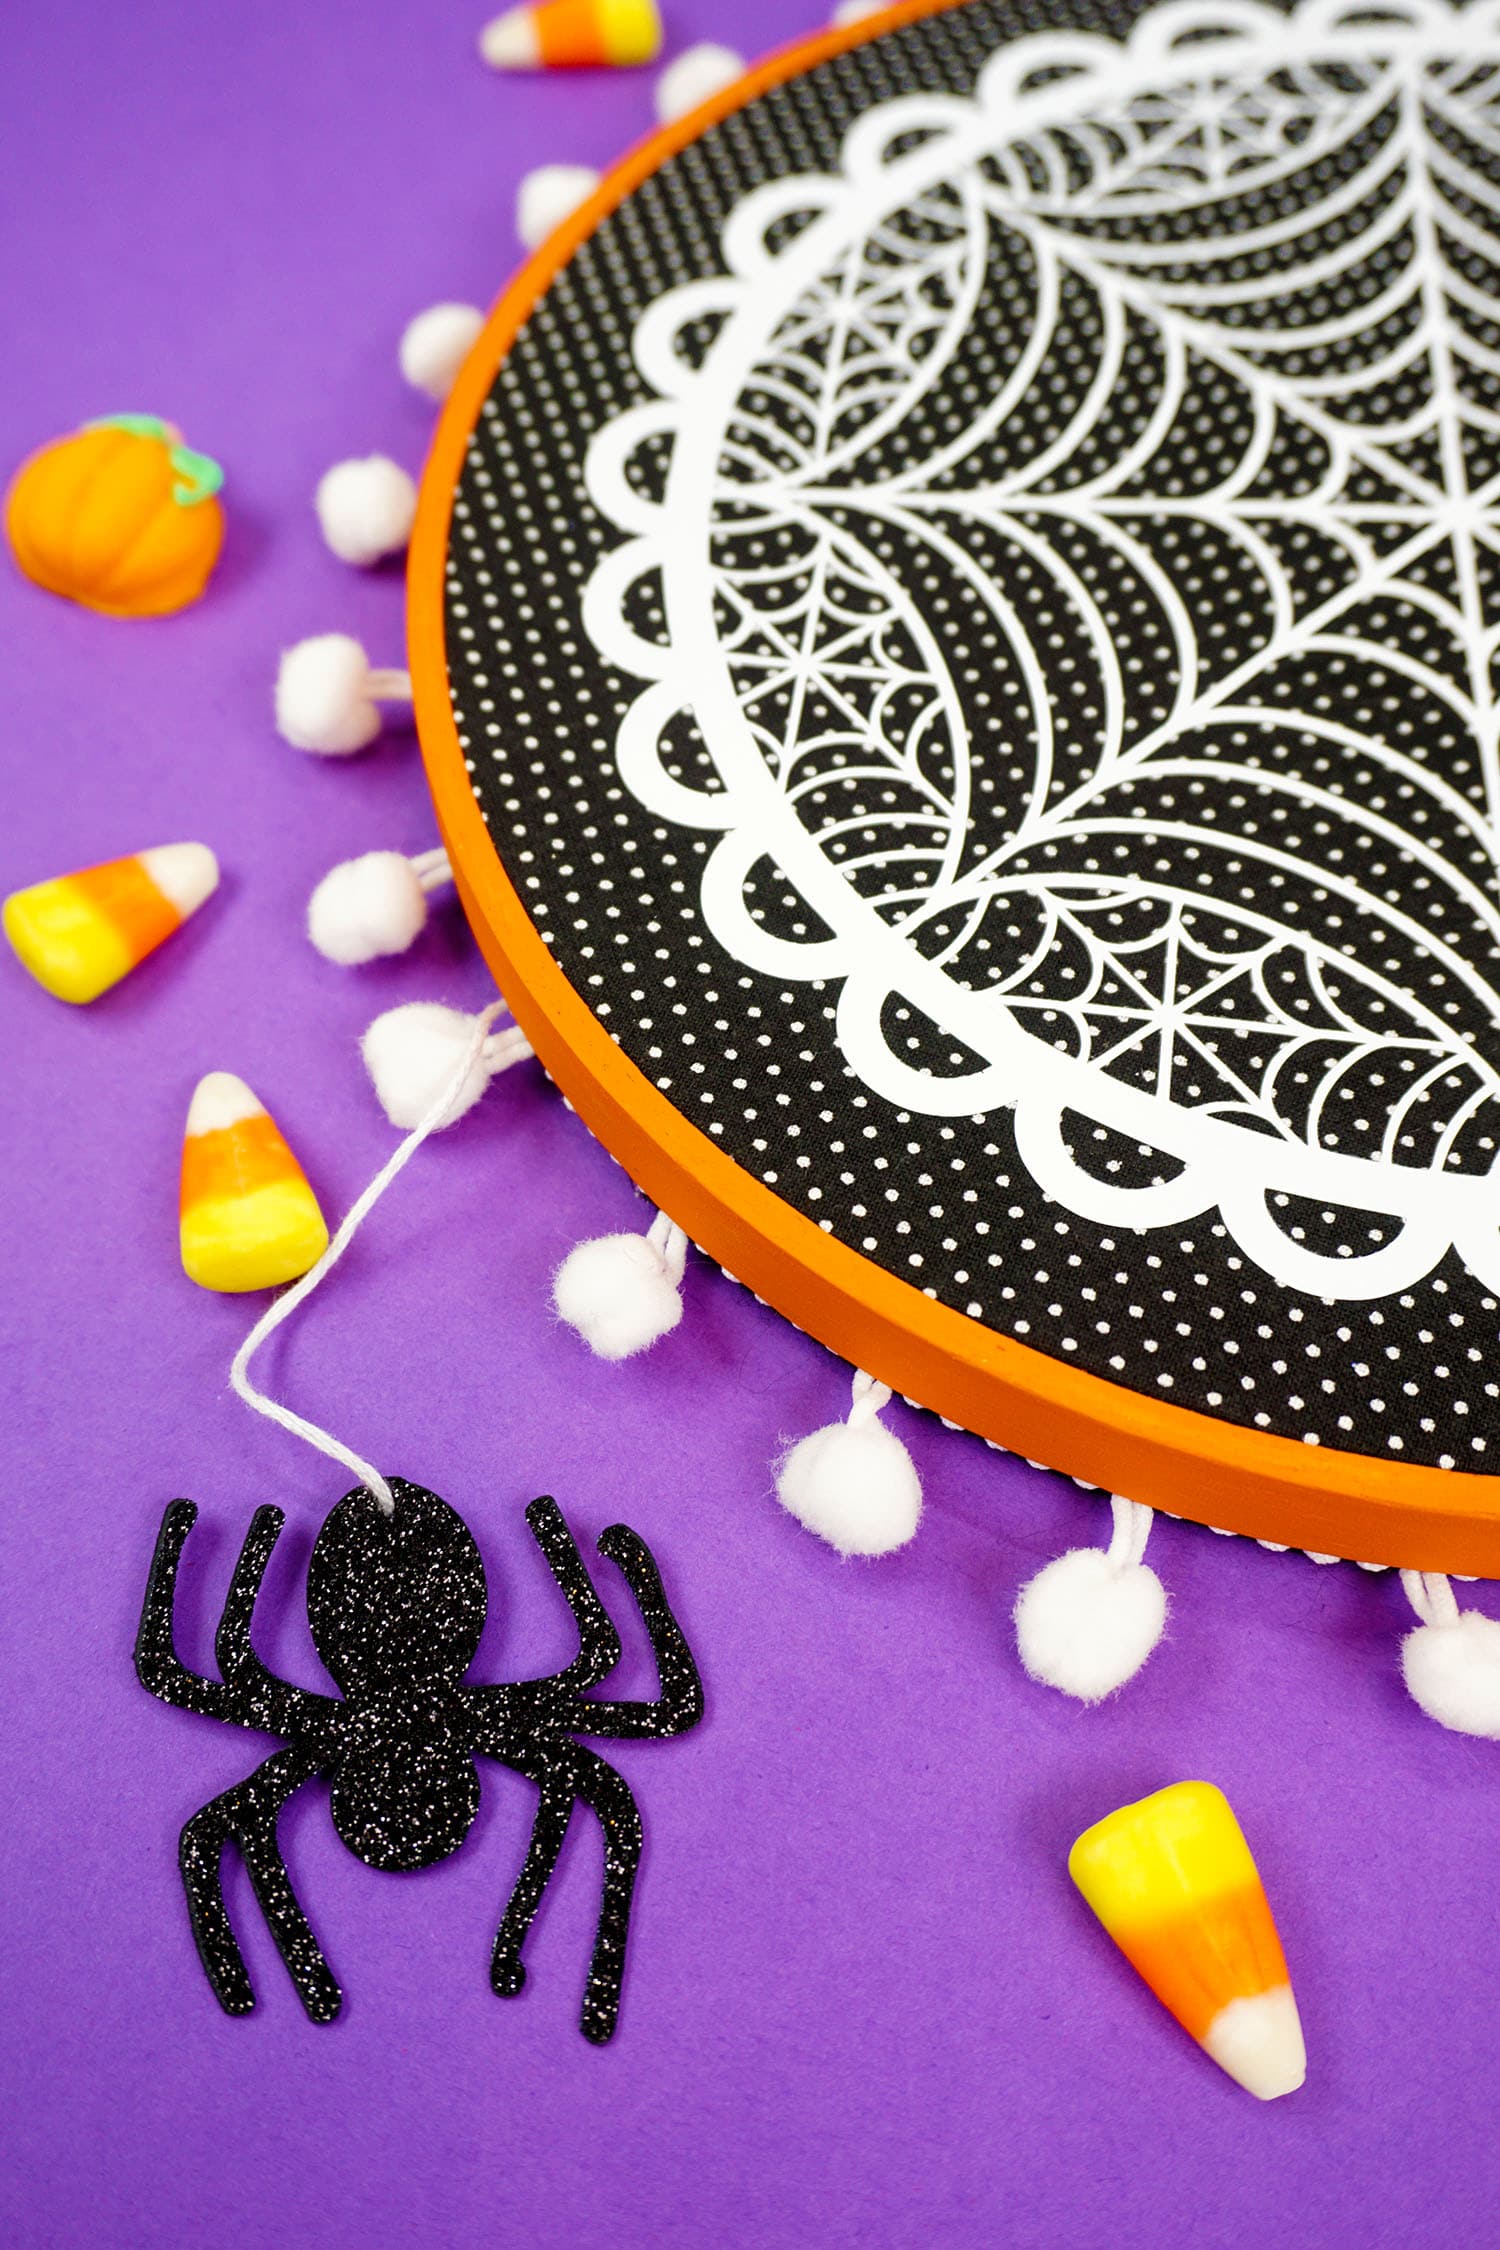 spider dangling from spider web embroidery hoop project with candy corns